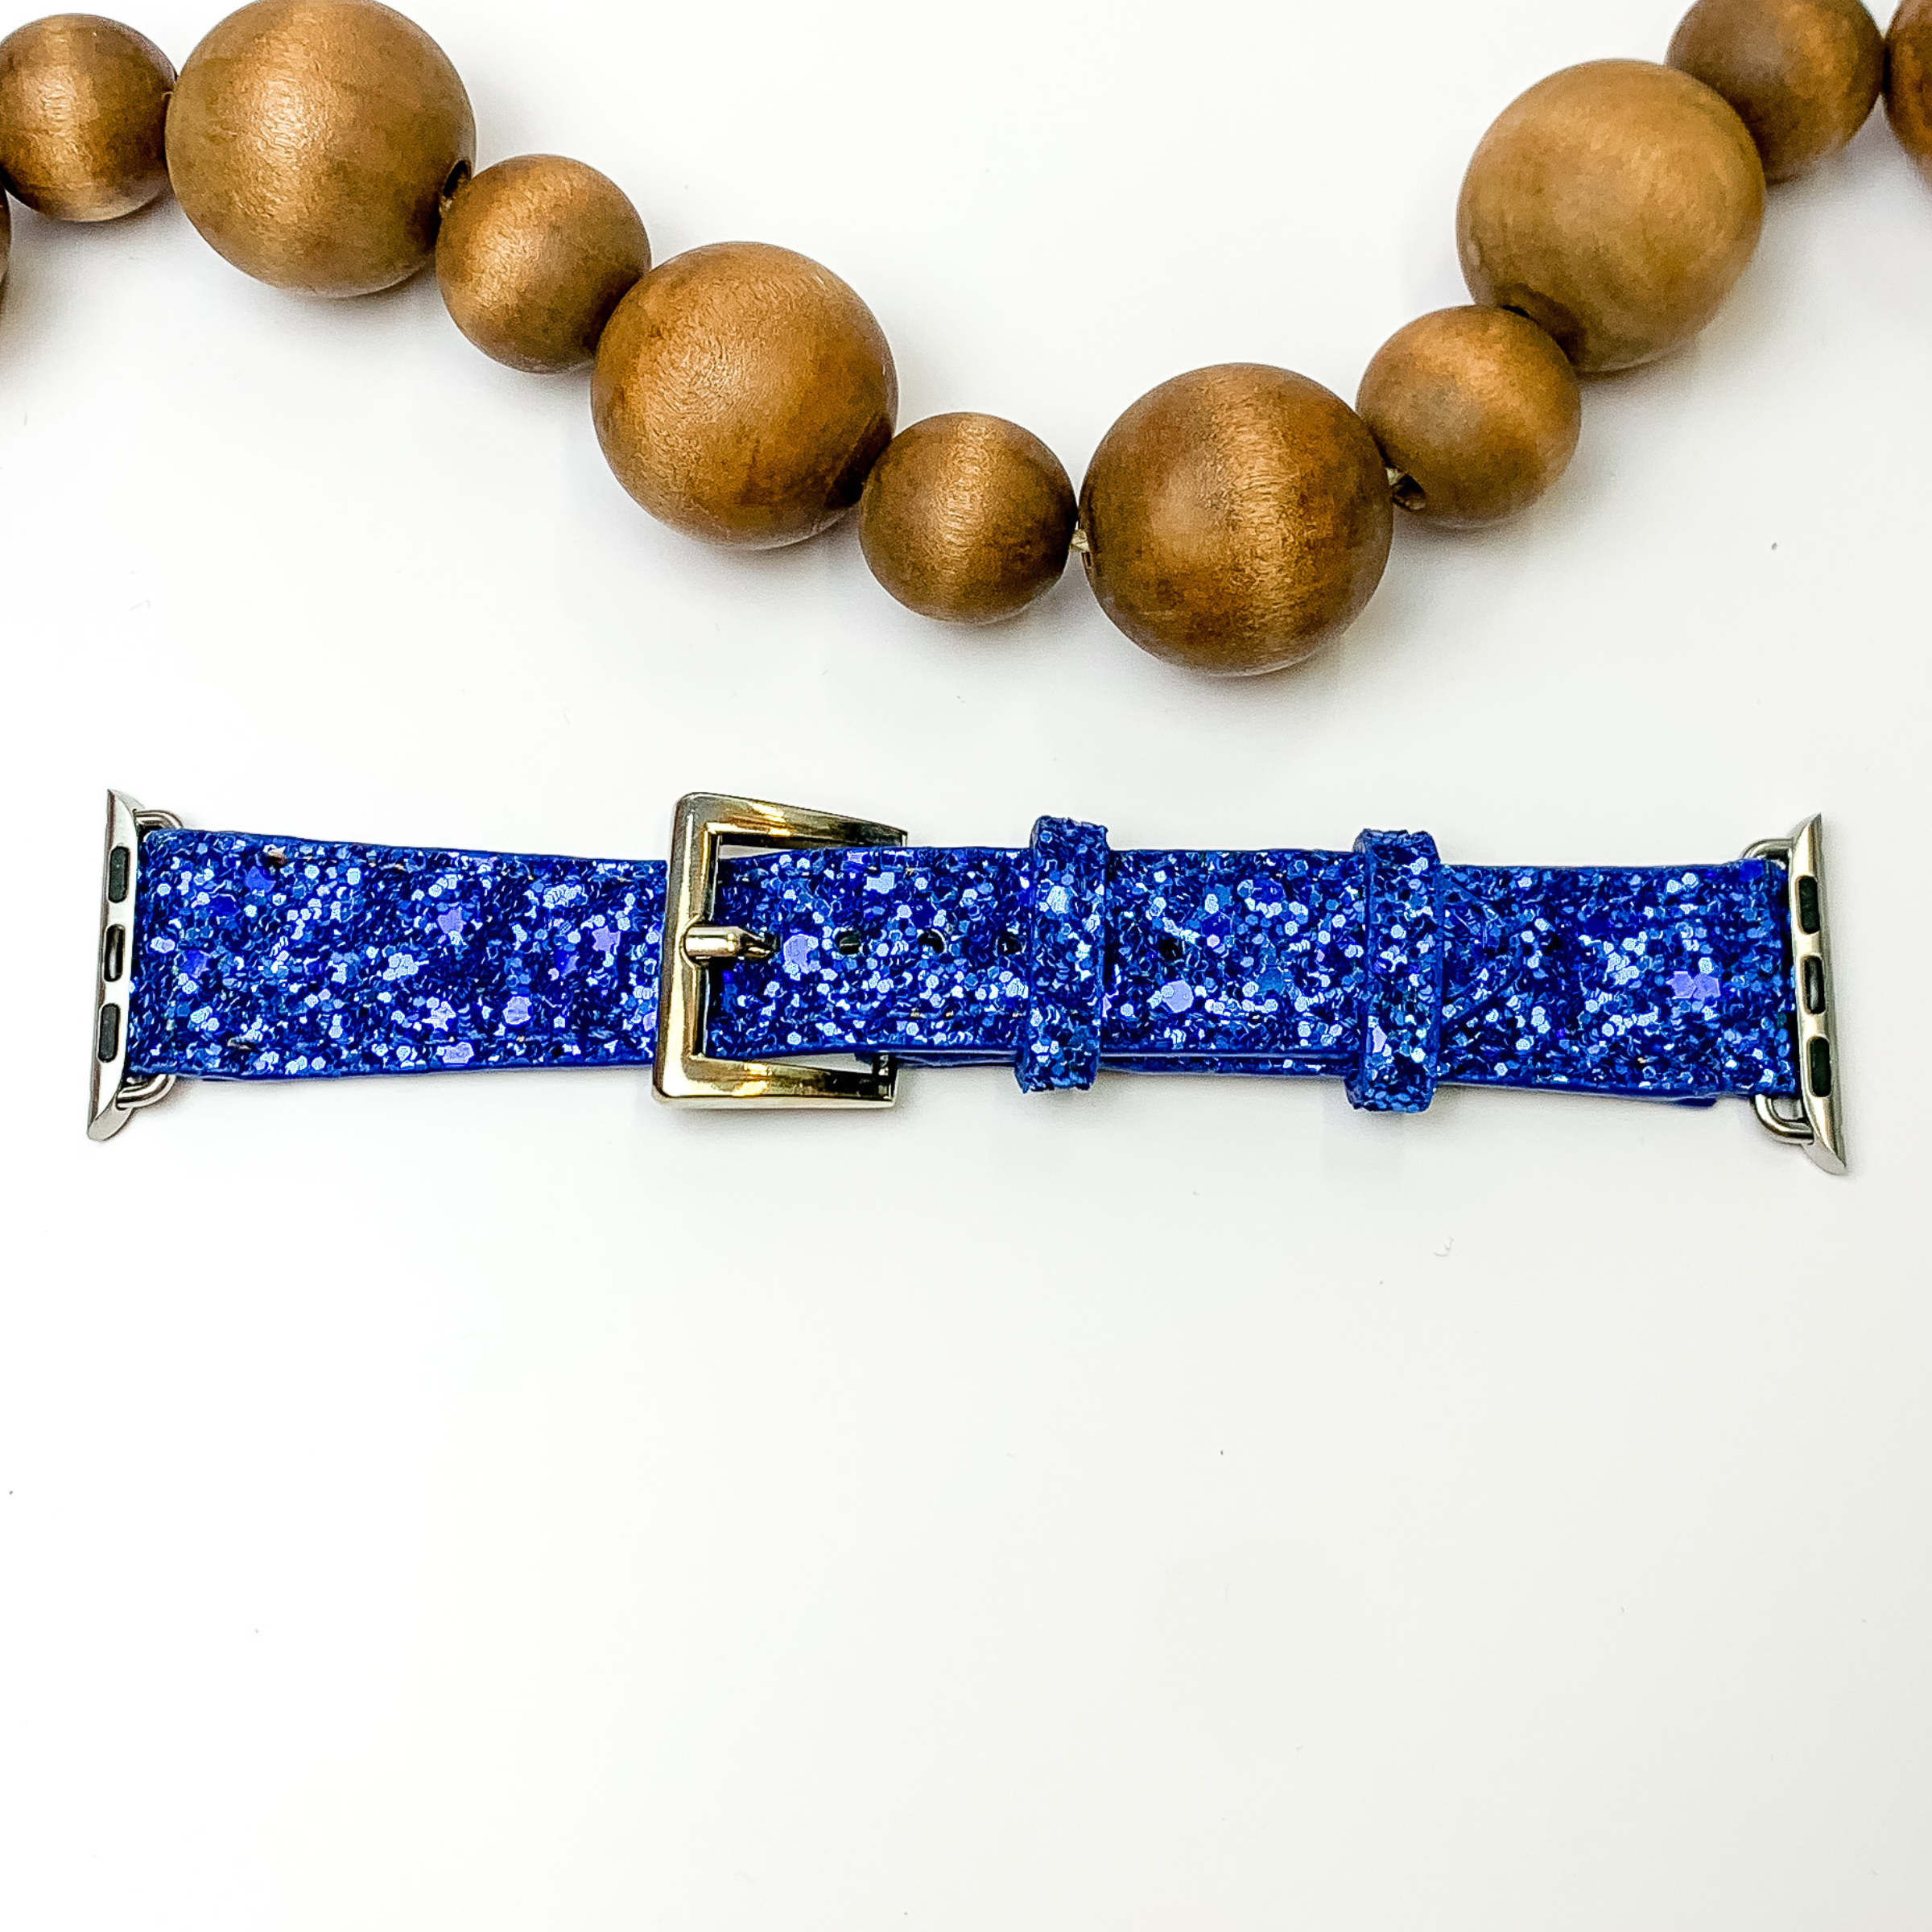 Unstoppable Sparkle Apple Watch Band in Royal Blue Glitter - Giddy Up Glamour Boutique